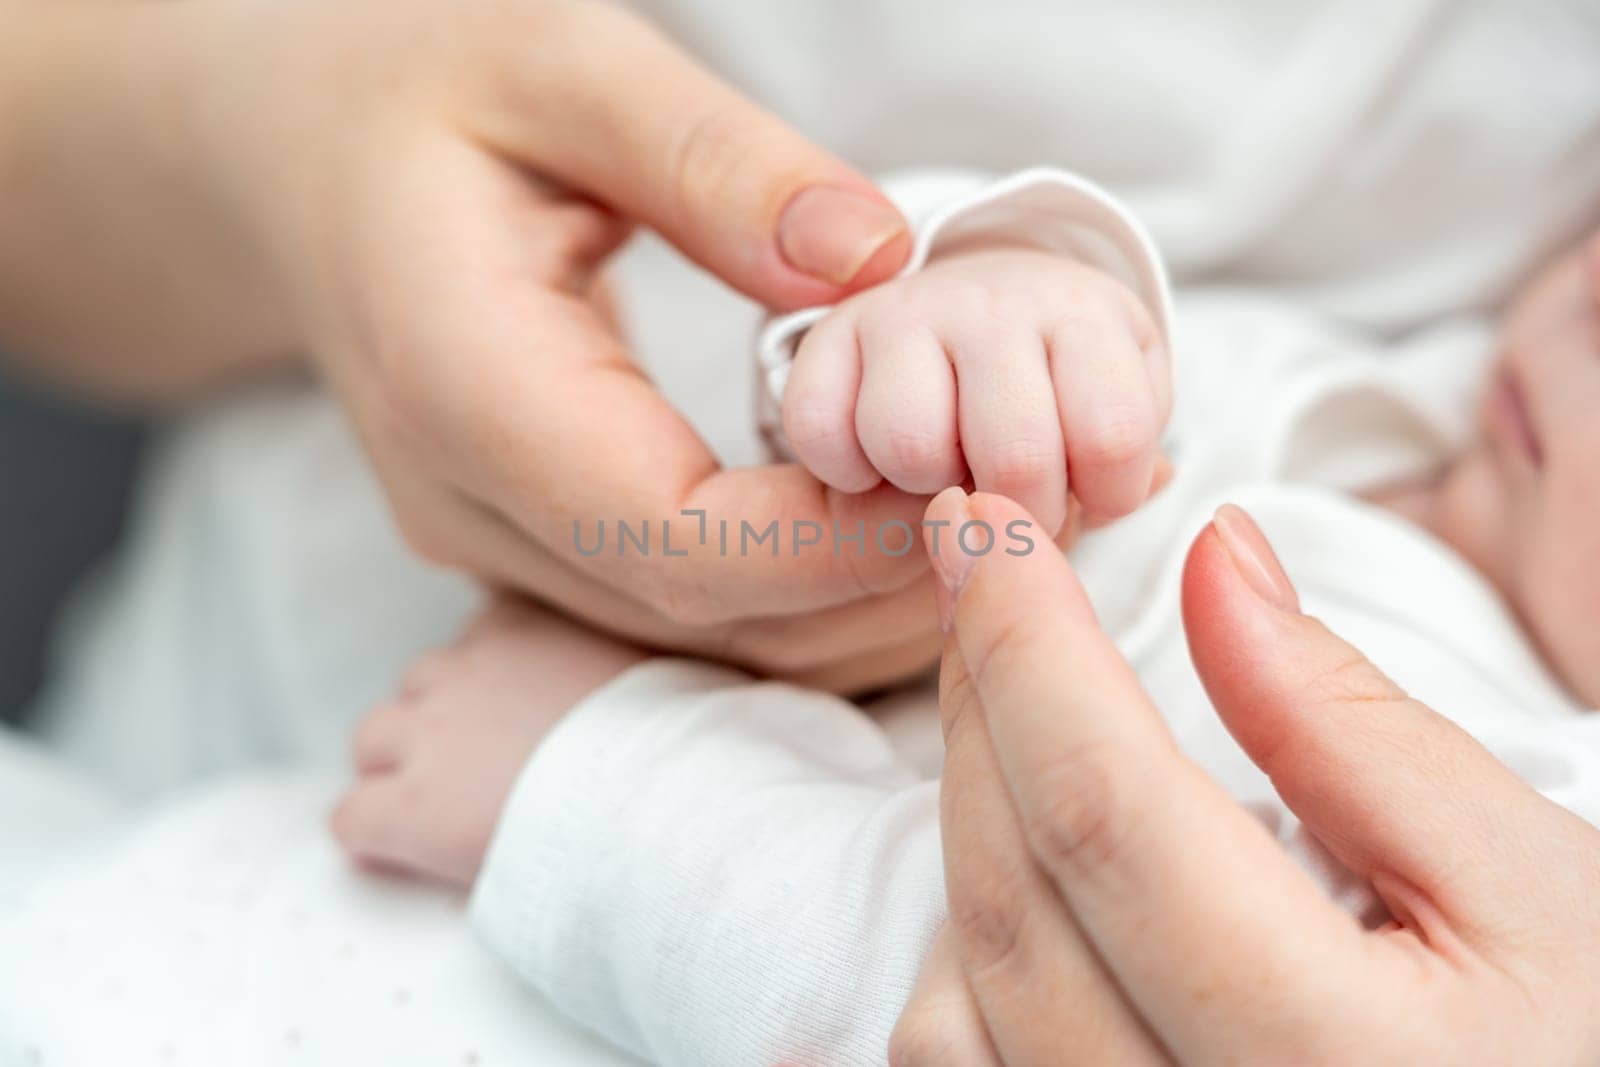 Tiny newborn hand tenderly holds onto mother's finger, portraying the depth of the unbreakable mother-infant bond